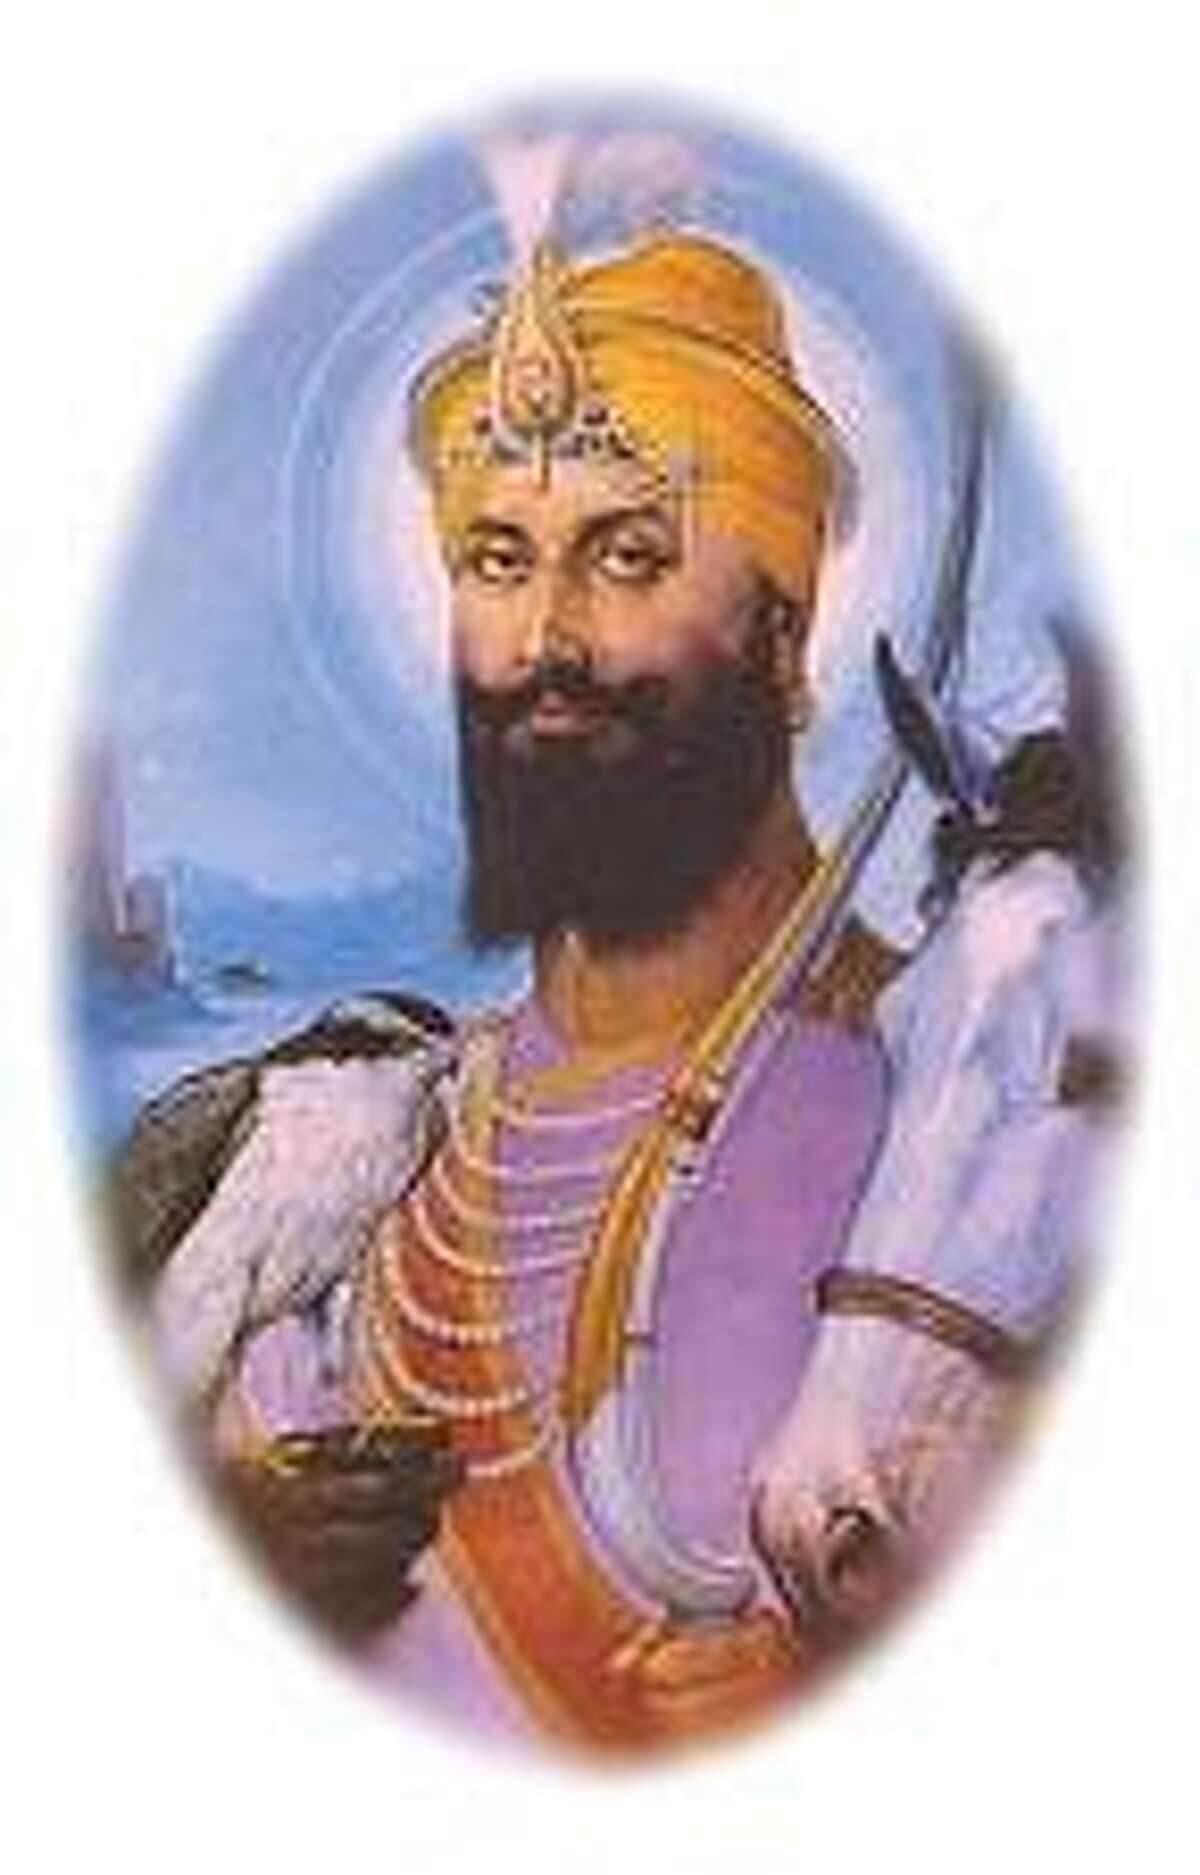 Houston-area Sikhs mark the birth of Guru Gobind Singh, the 10th and last in the line of shapers of the faith, on Saturday.